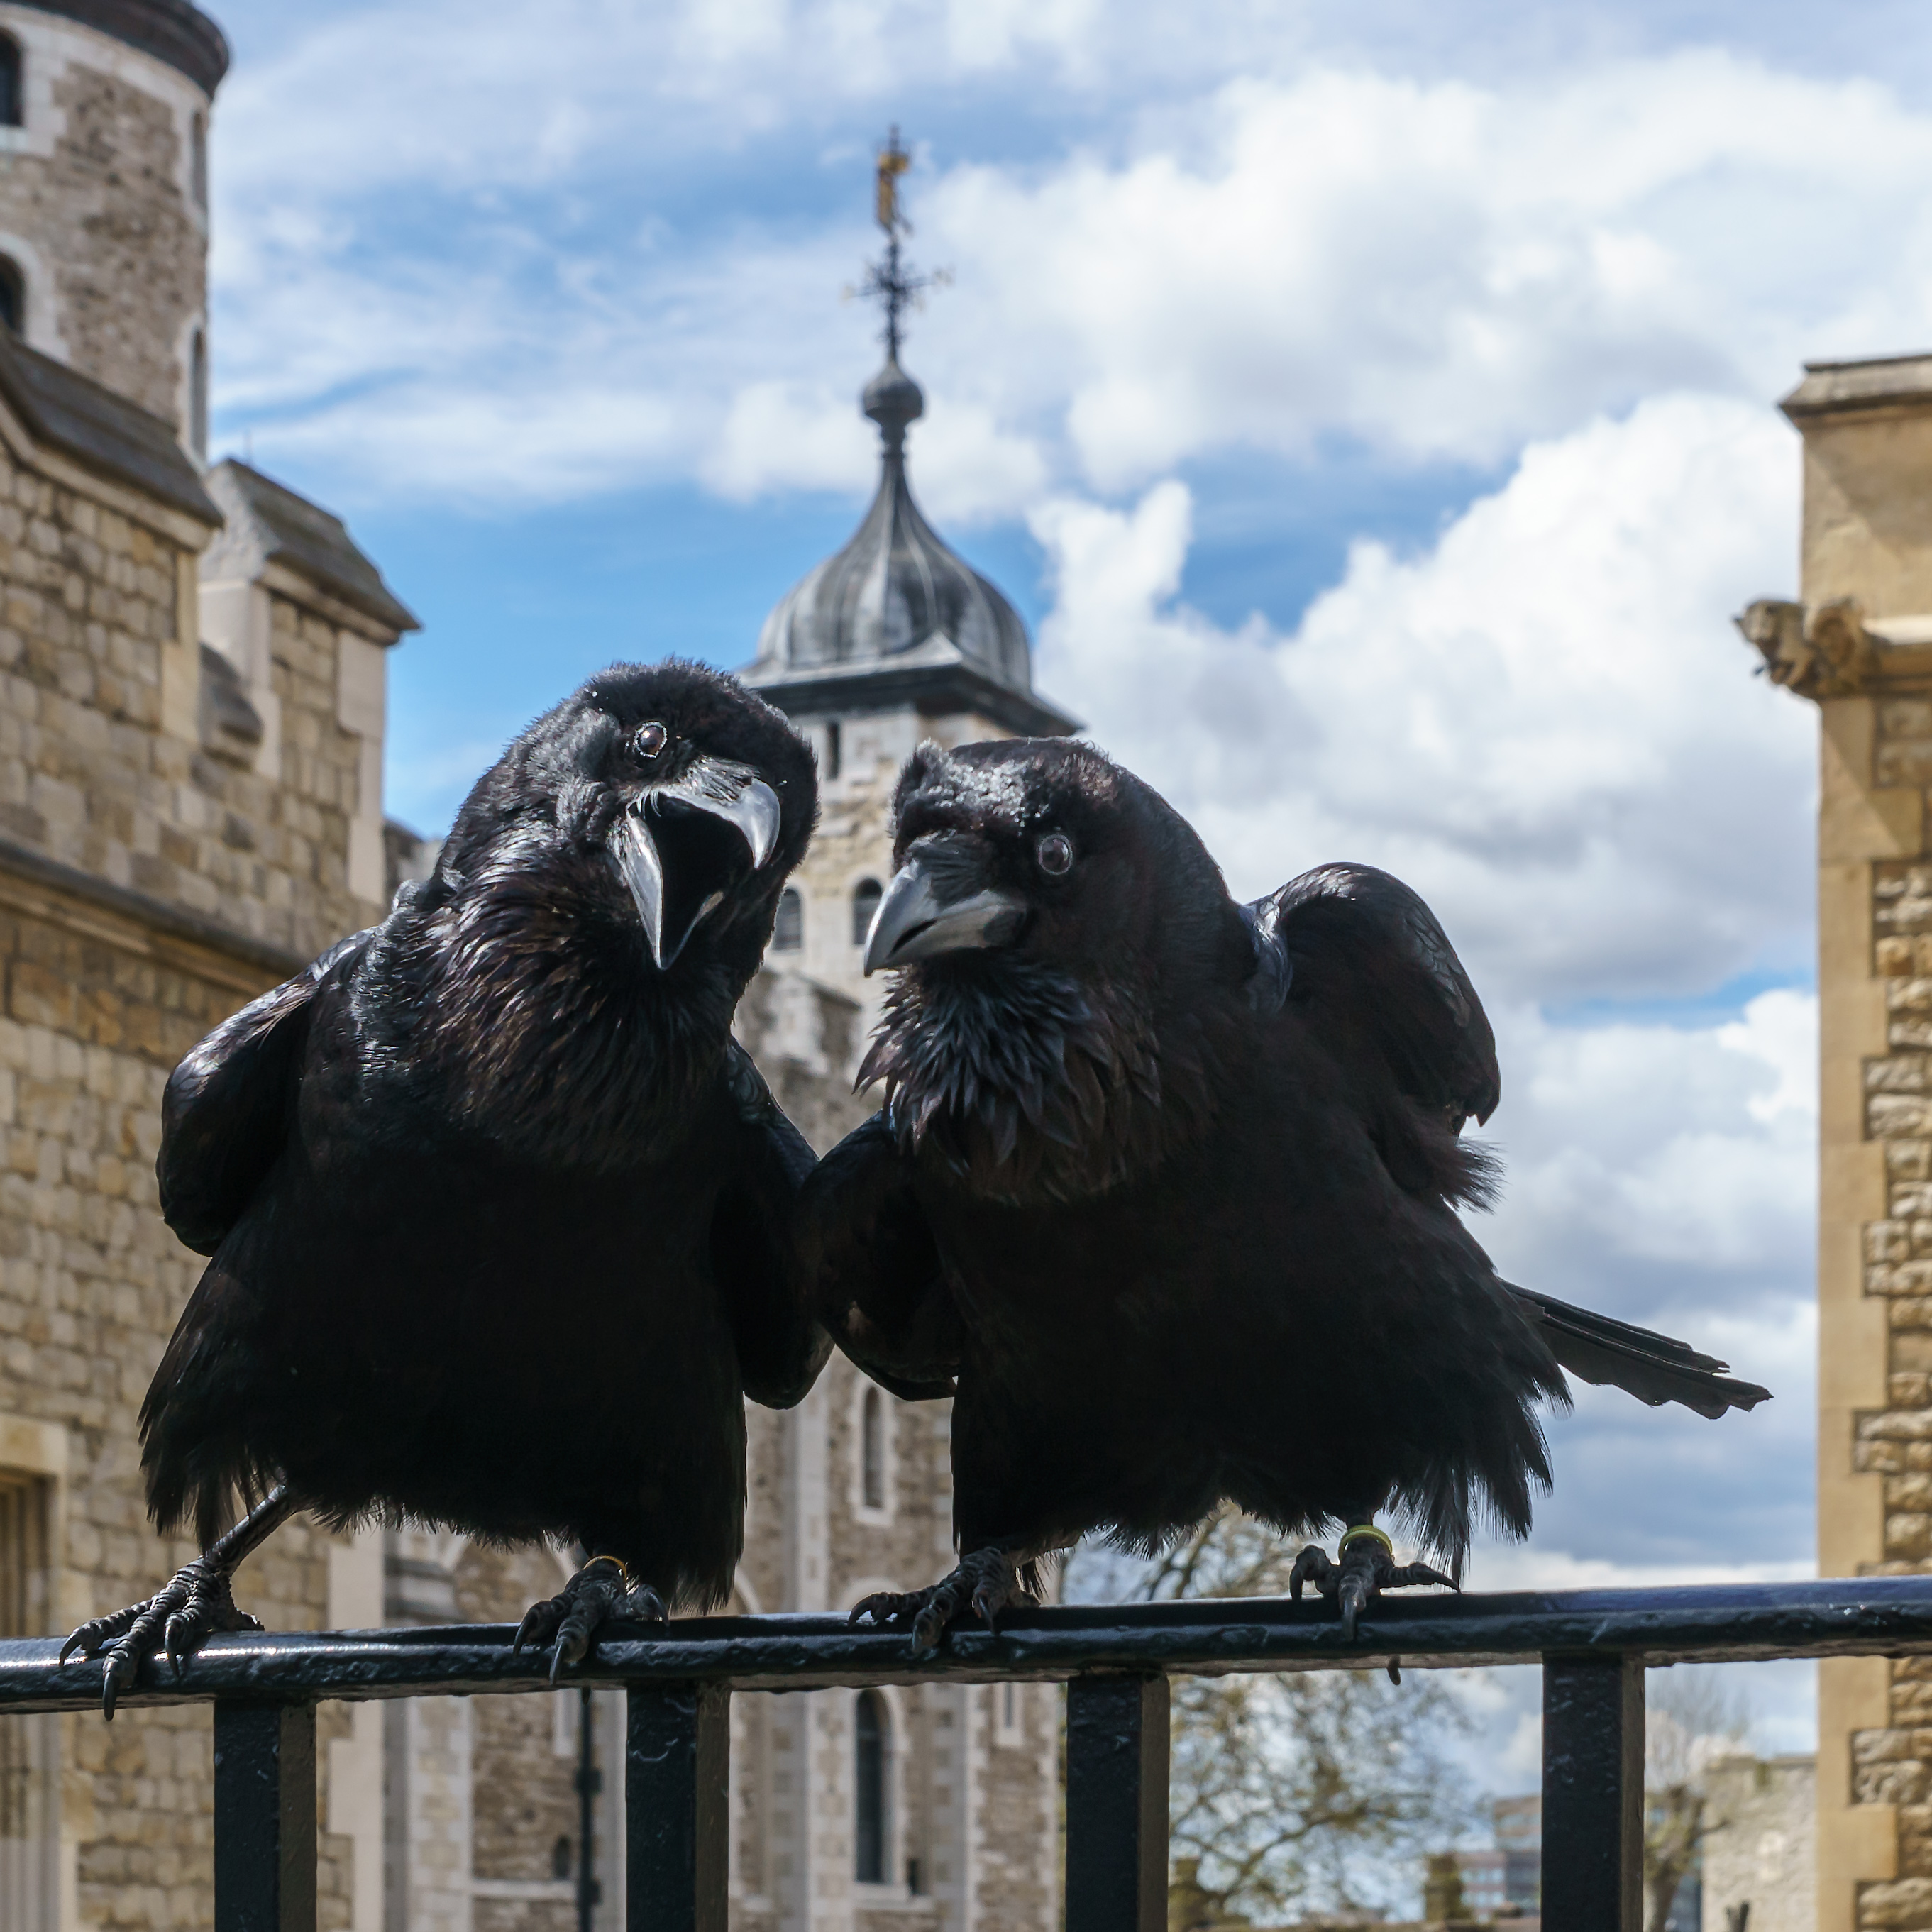 Odin and Thor, Ravens, Tower of London 2016-04-30a